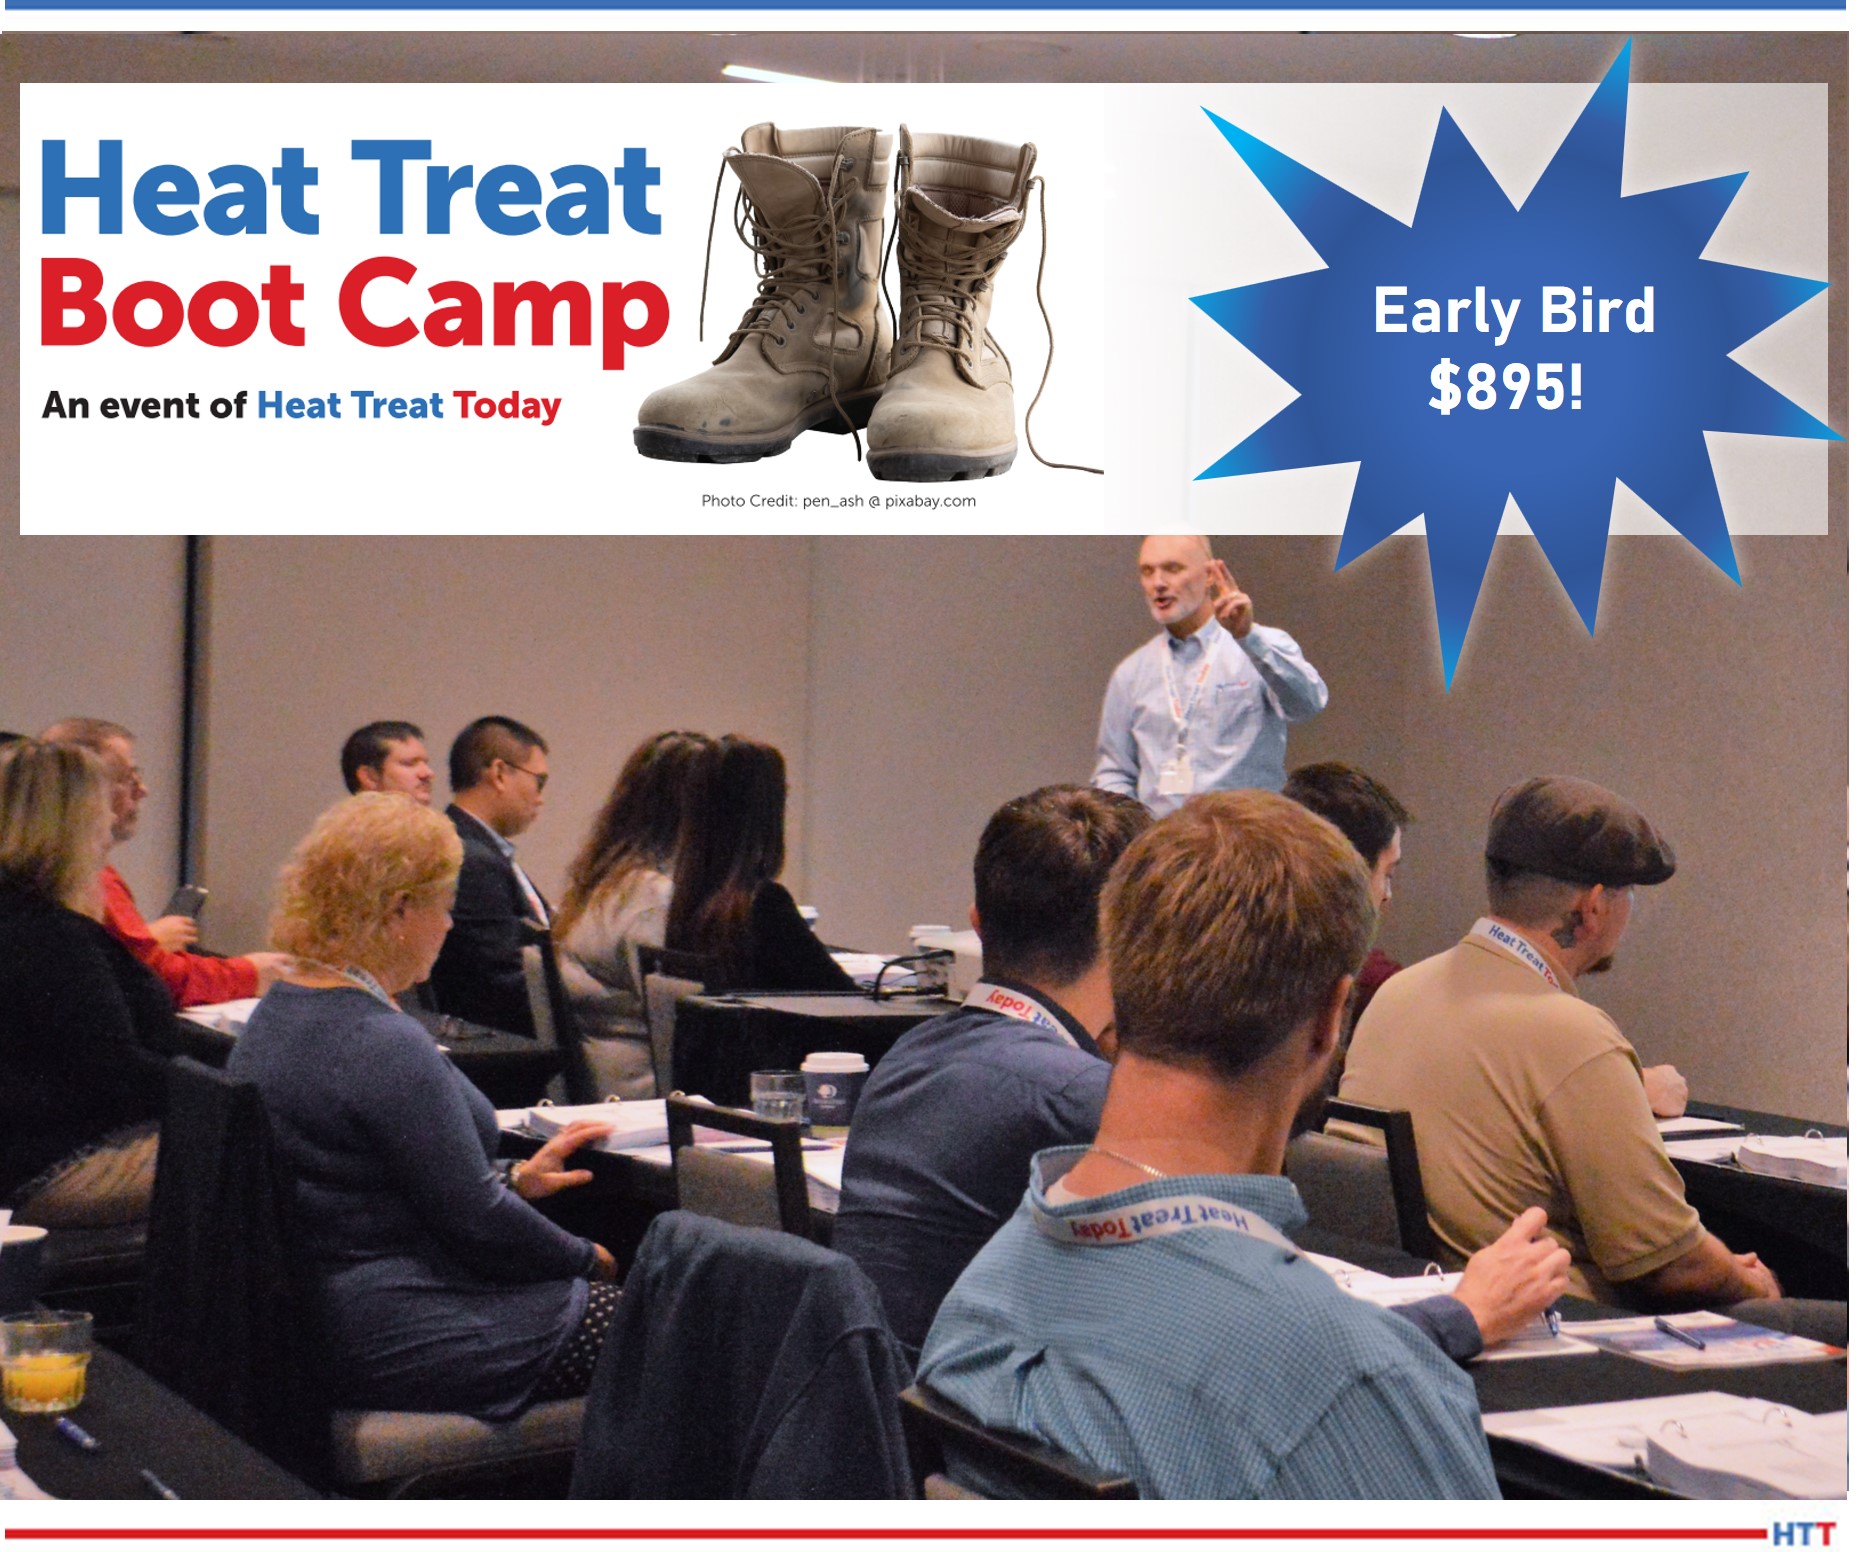 Heat Treat Boot Camp Event with Early Bird Pricing